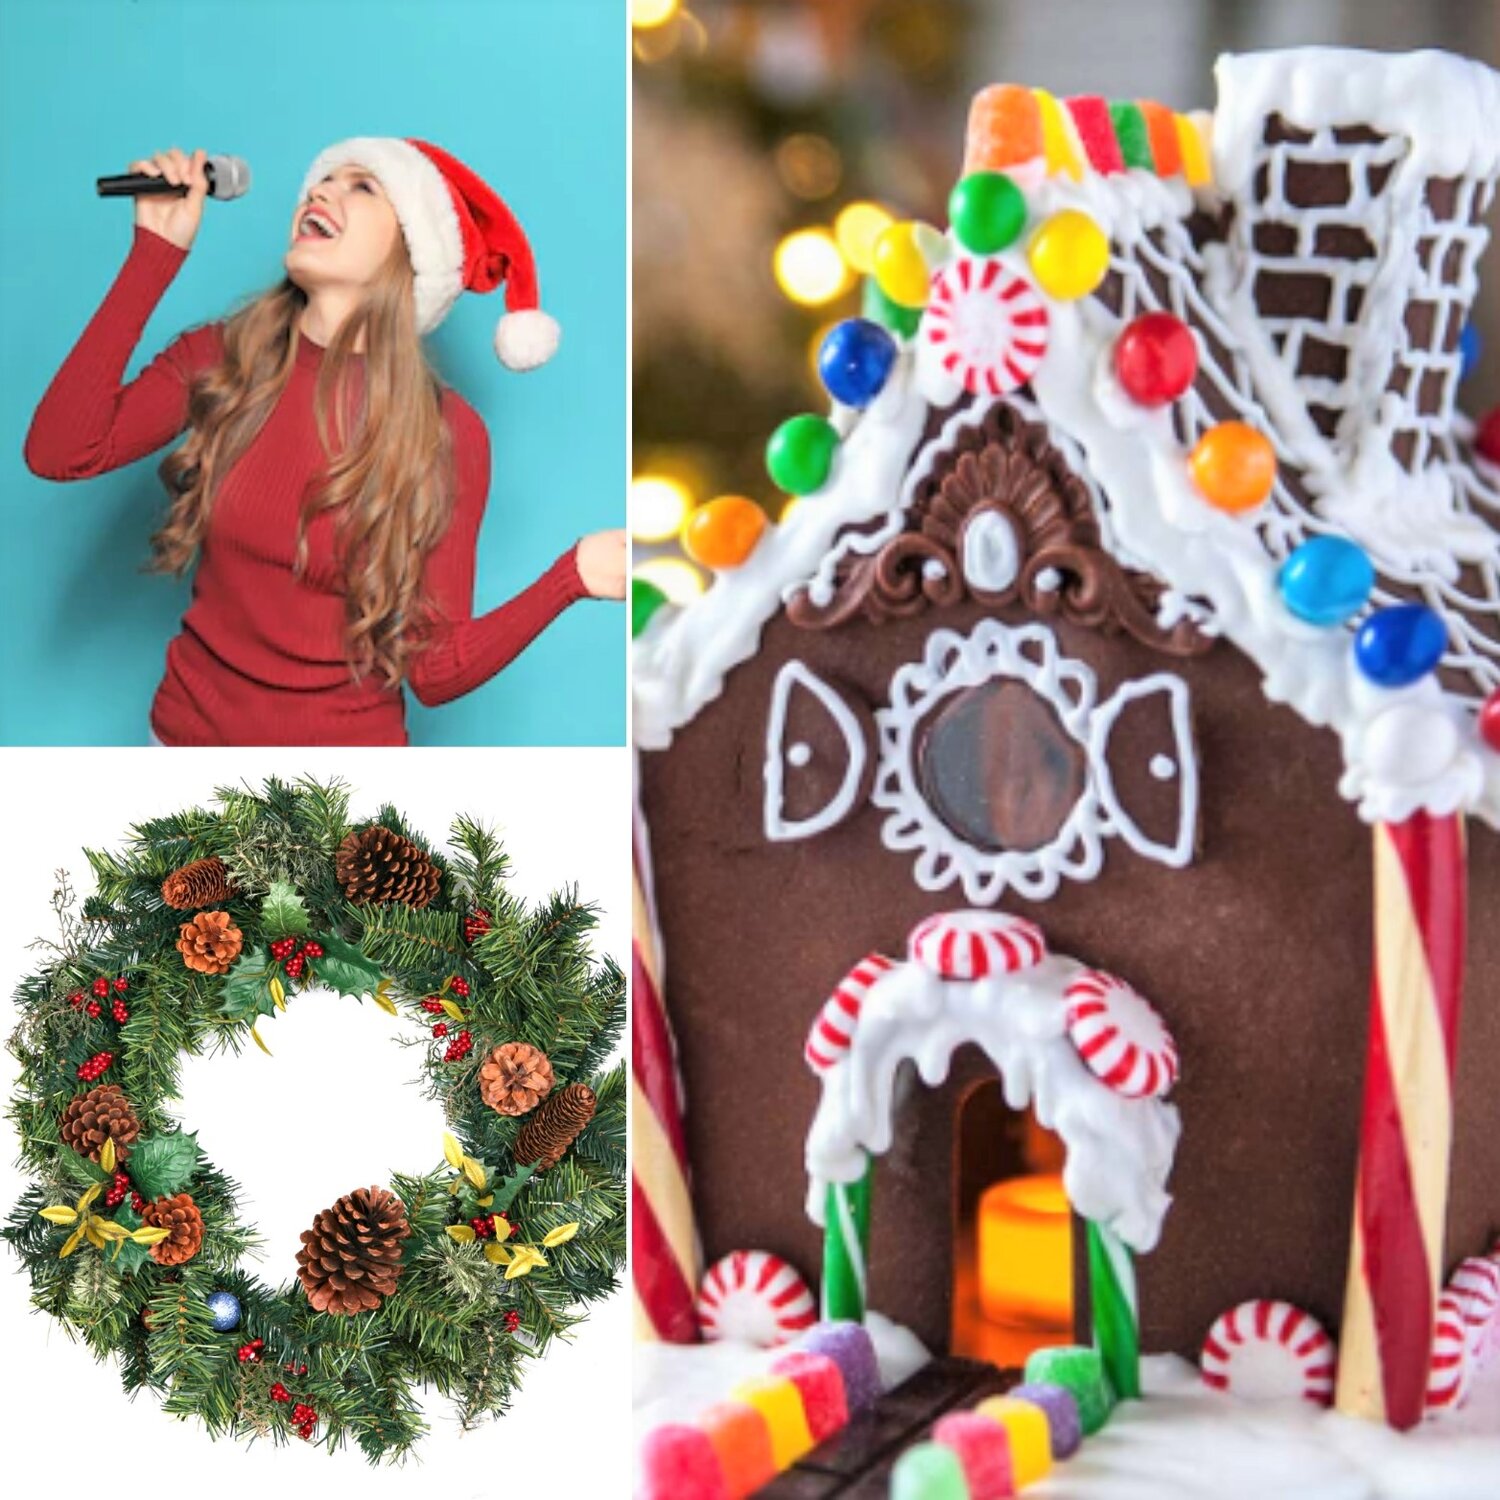 3 Virtual Christmas Party Ideas For Kids Families On Zoom Low To No Cost Fusioncardiotoronto